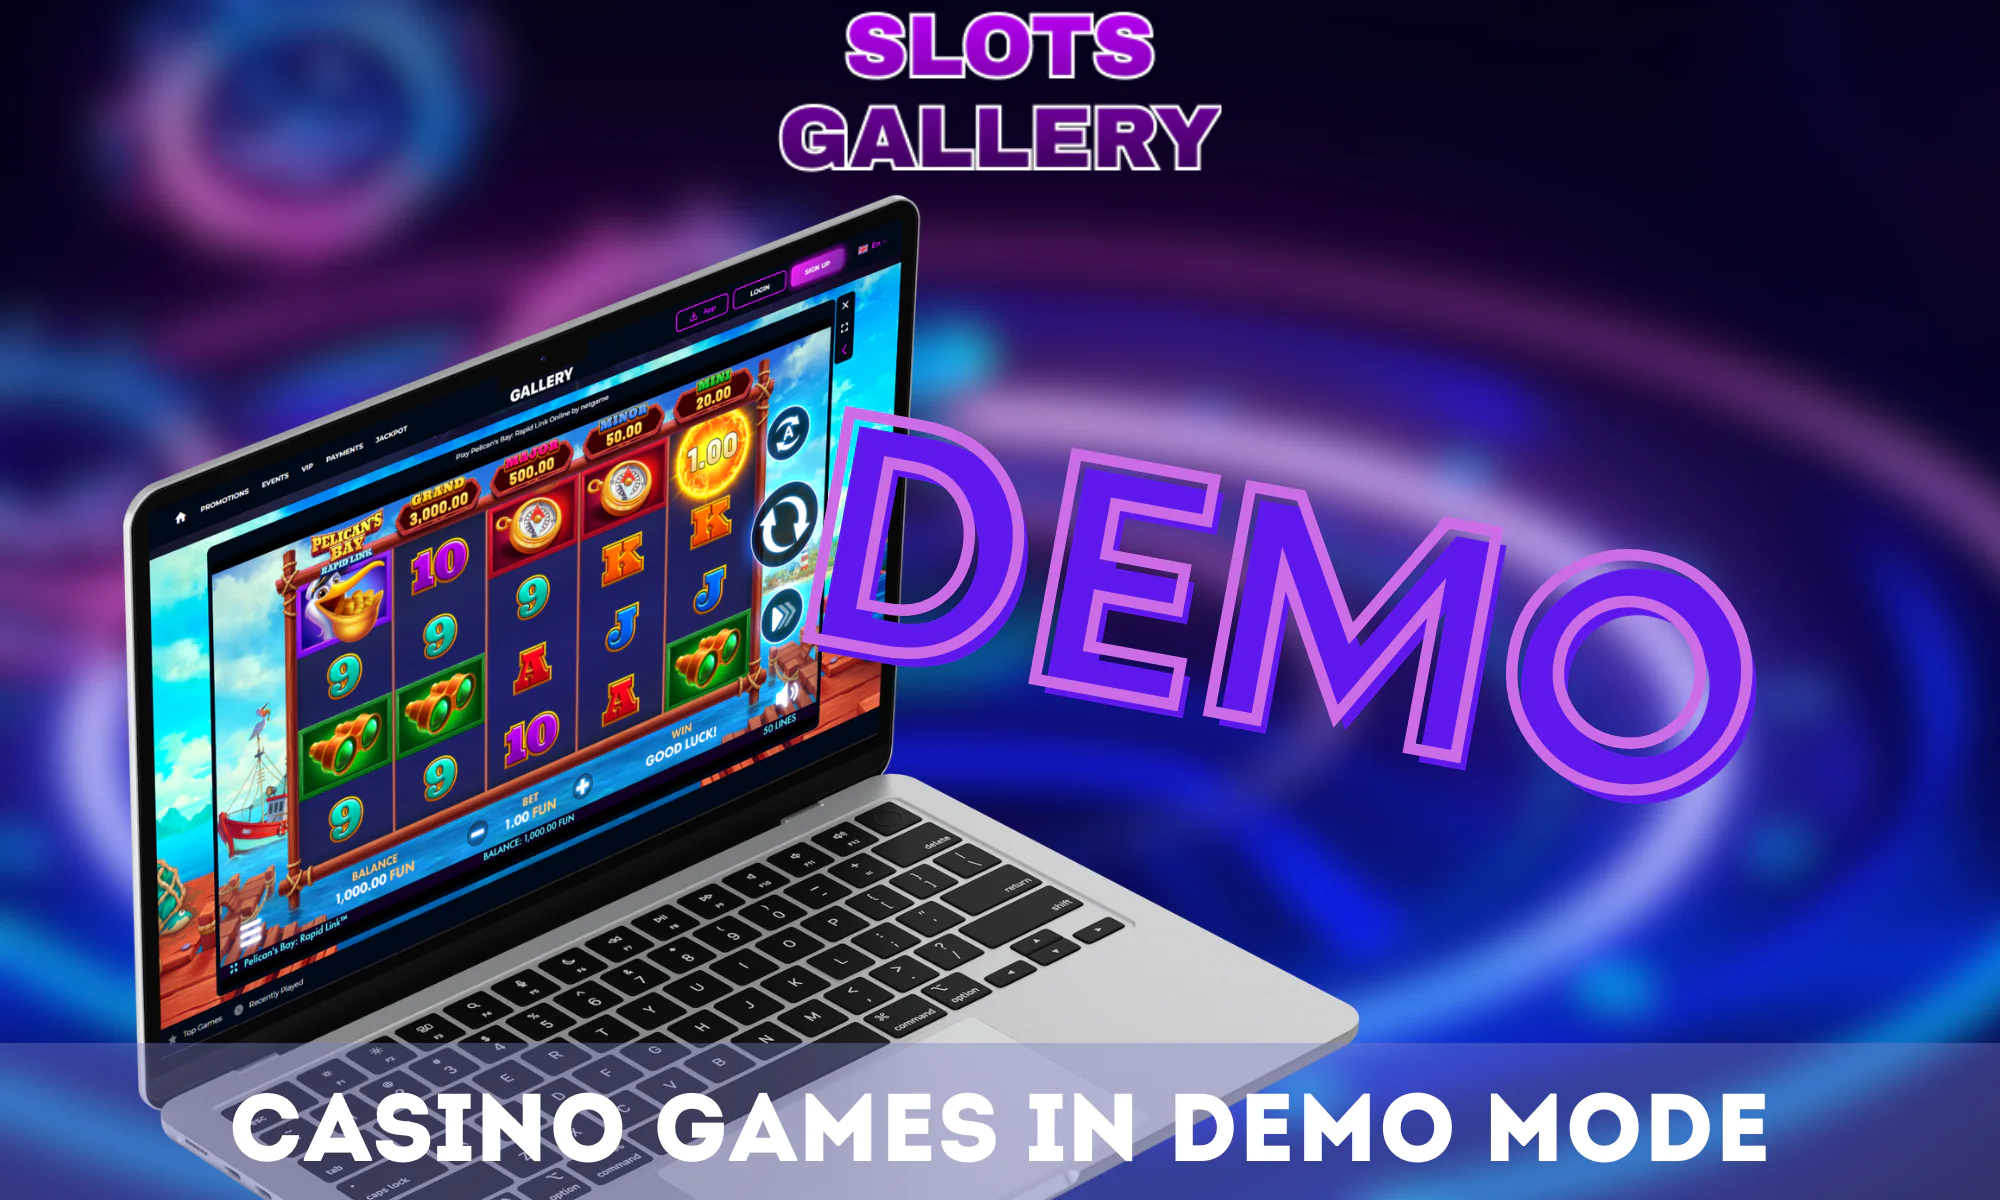 Slots Gallery casino meets the needs of different players by offering a demo mode